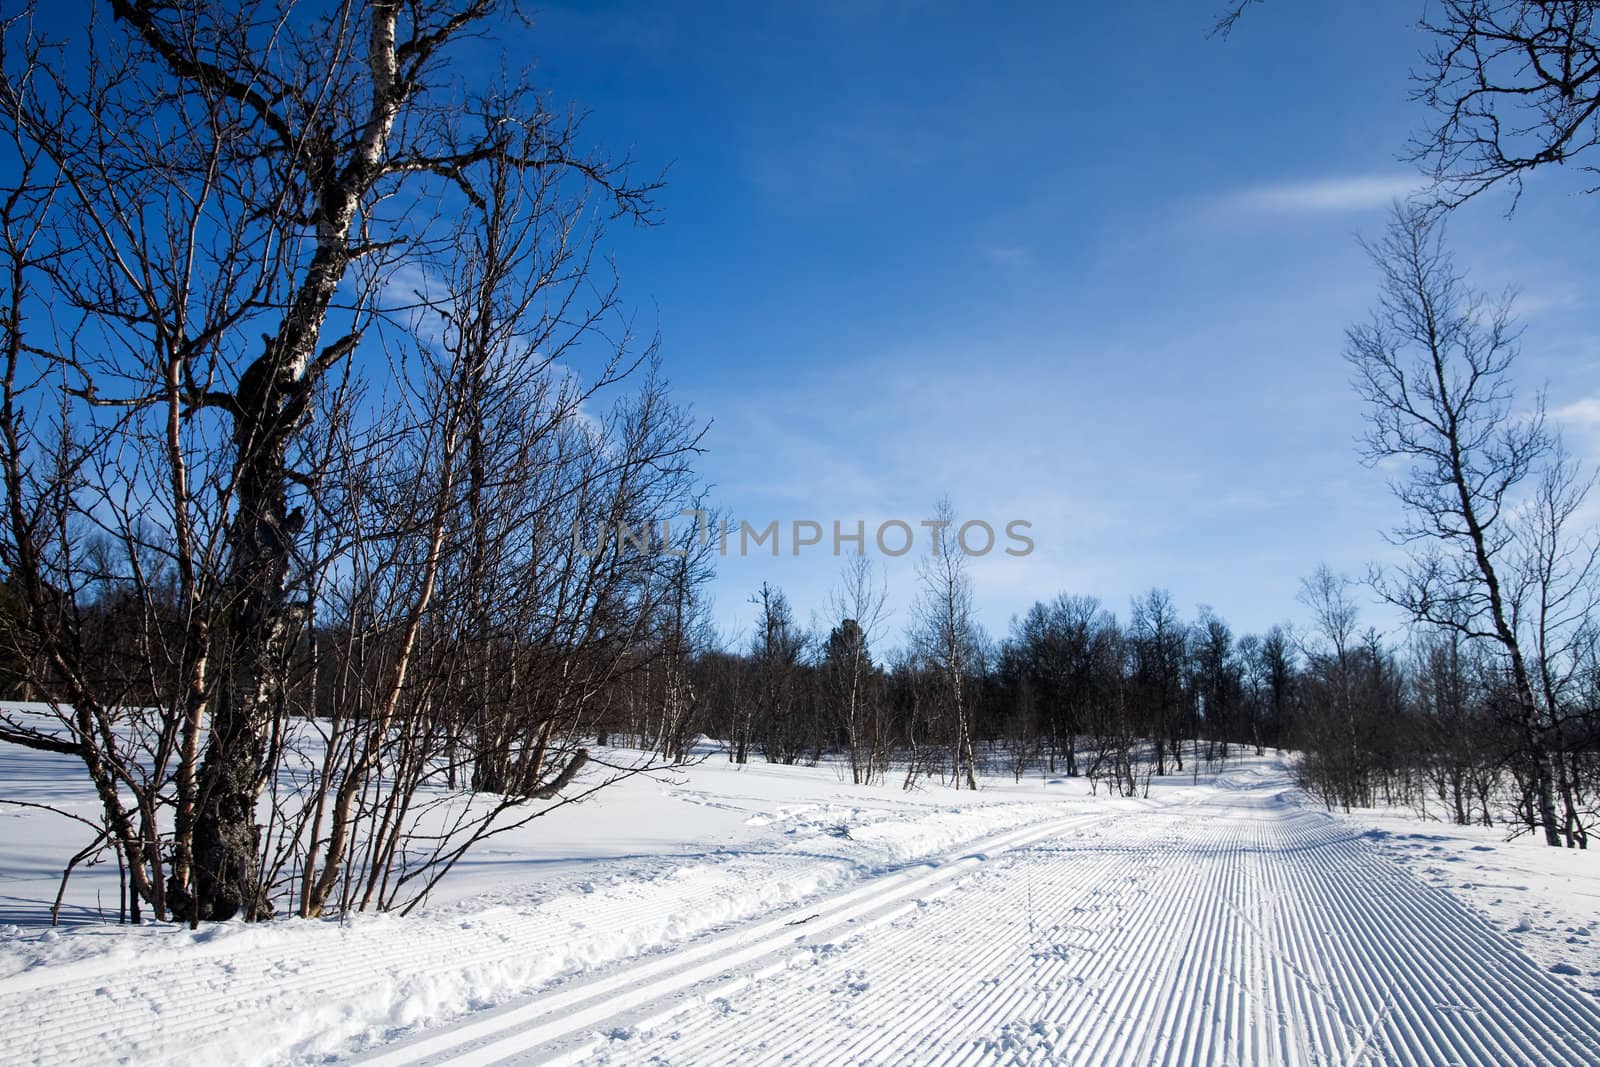 Groomed Cross Country Ski Trail by leaf